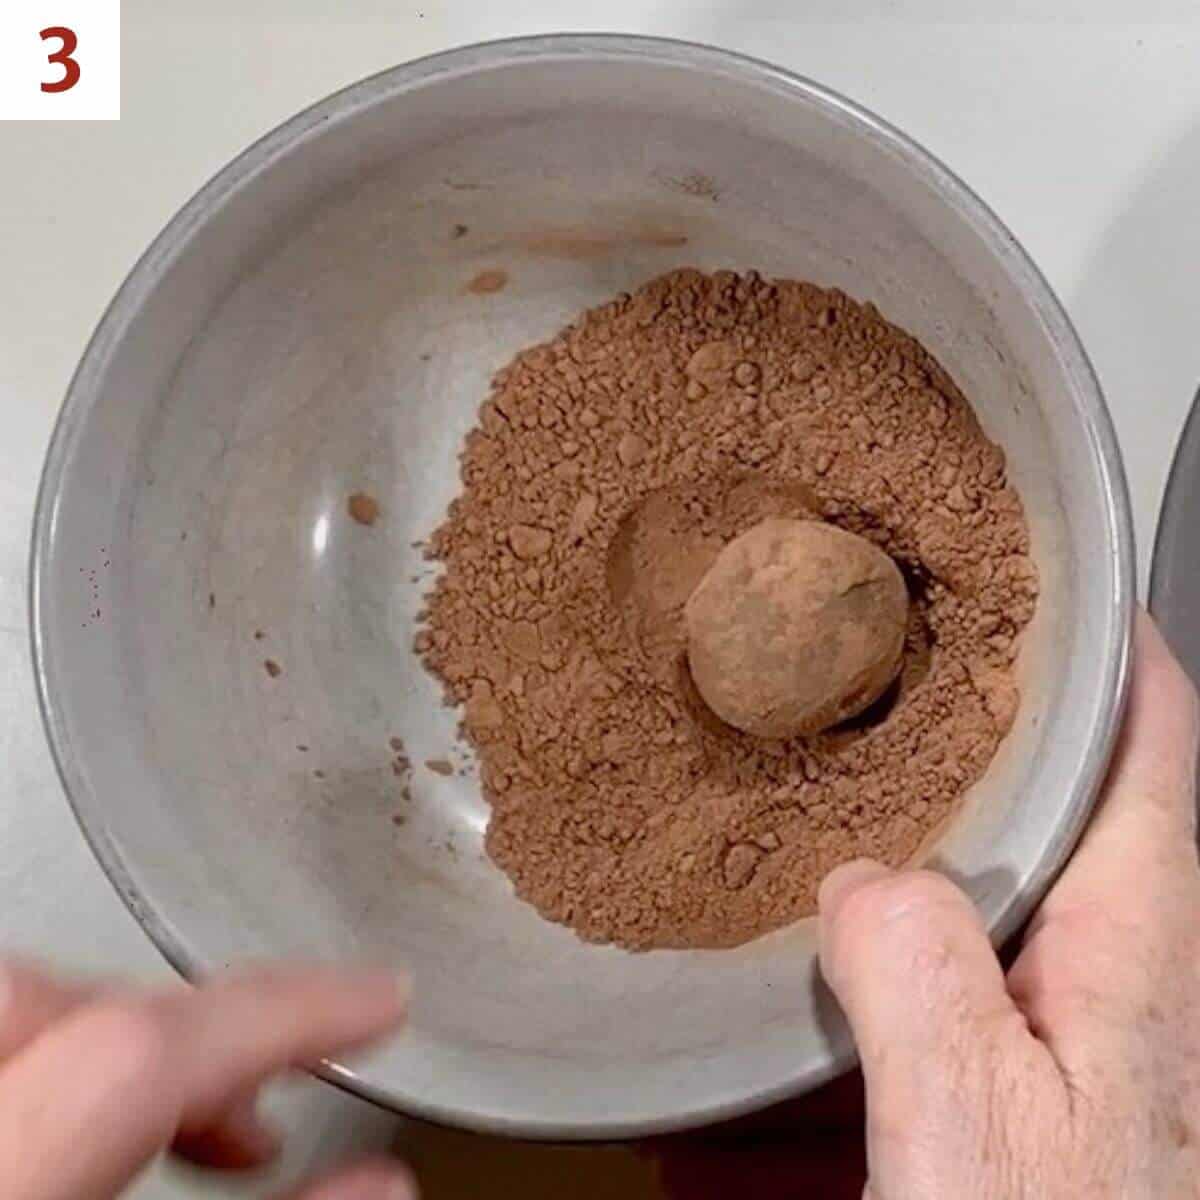 Rolling a truffle ball in cocoa powder.